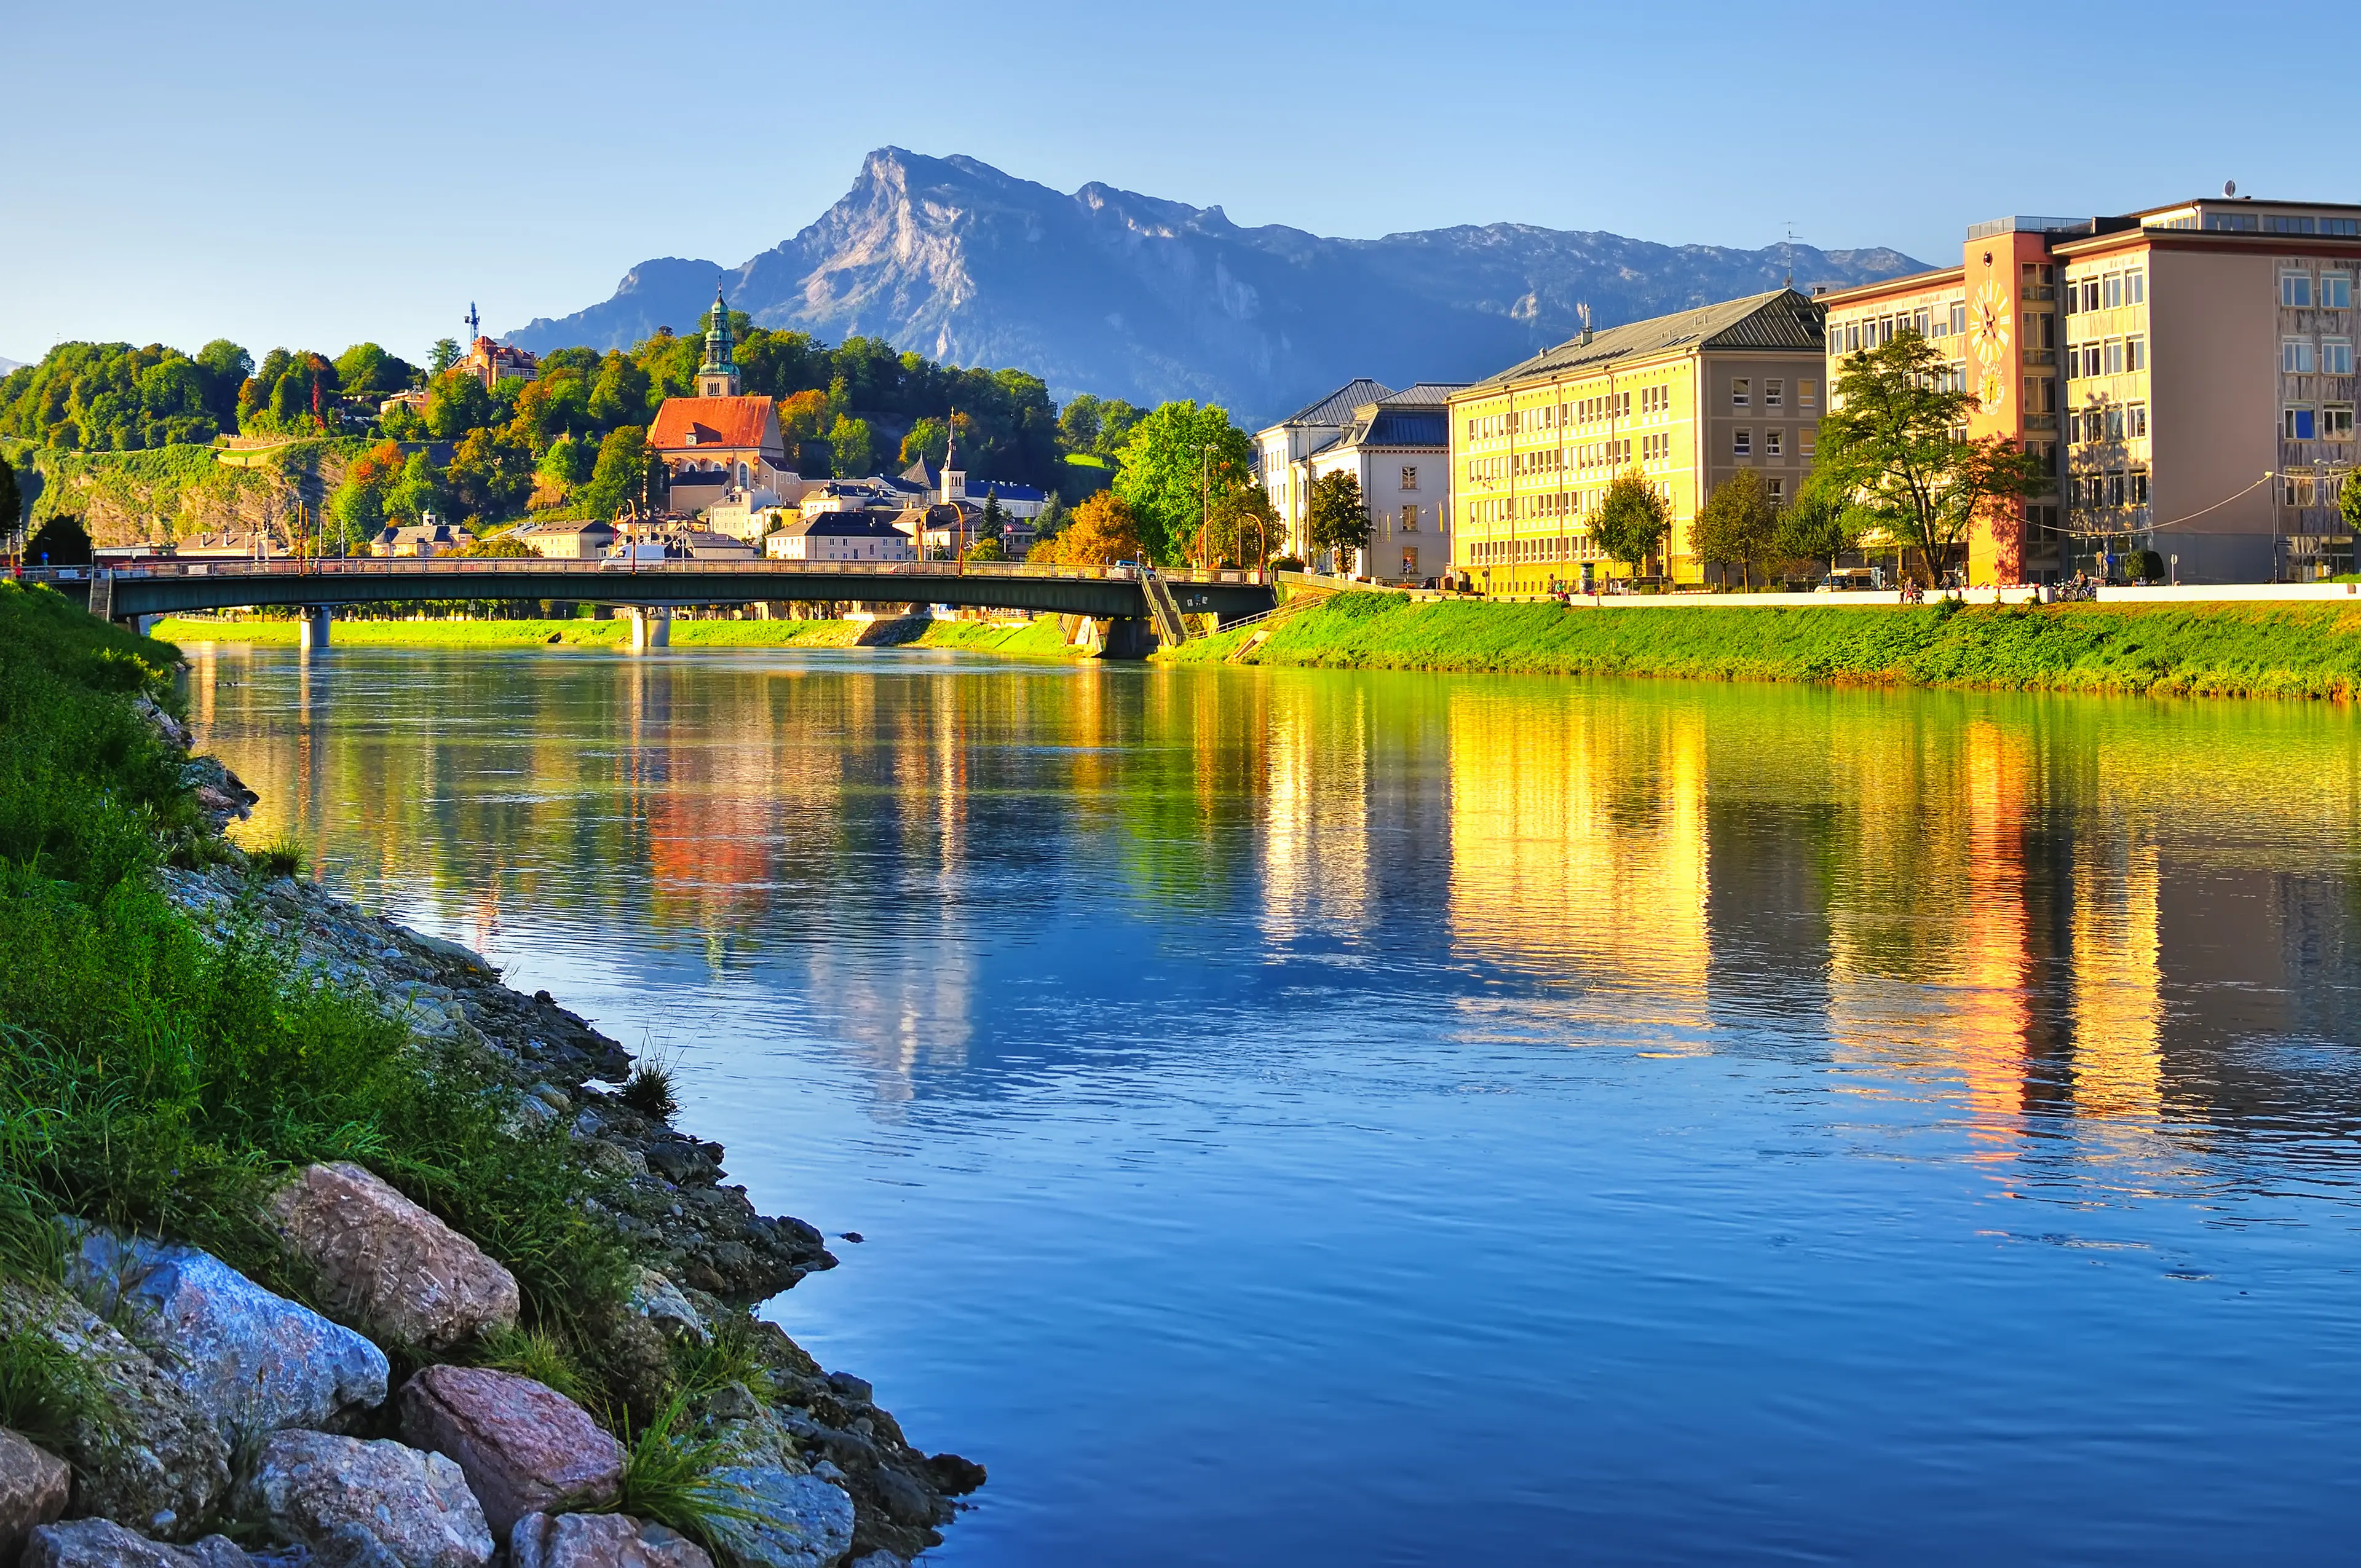 1-Day Family Adventure: Sightseeing and Shopping in Salzburg